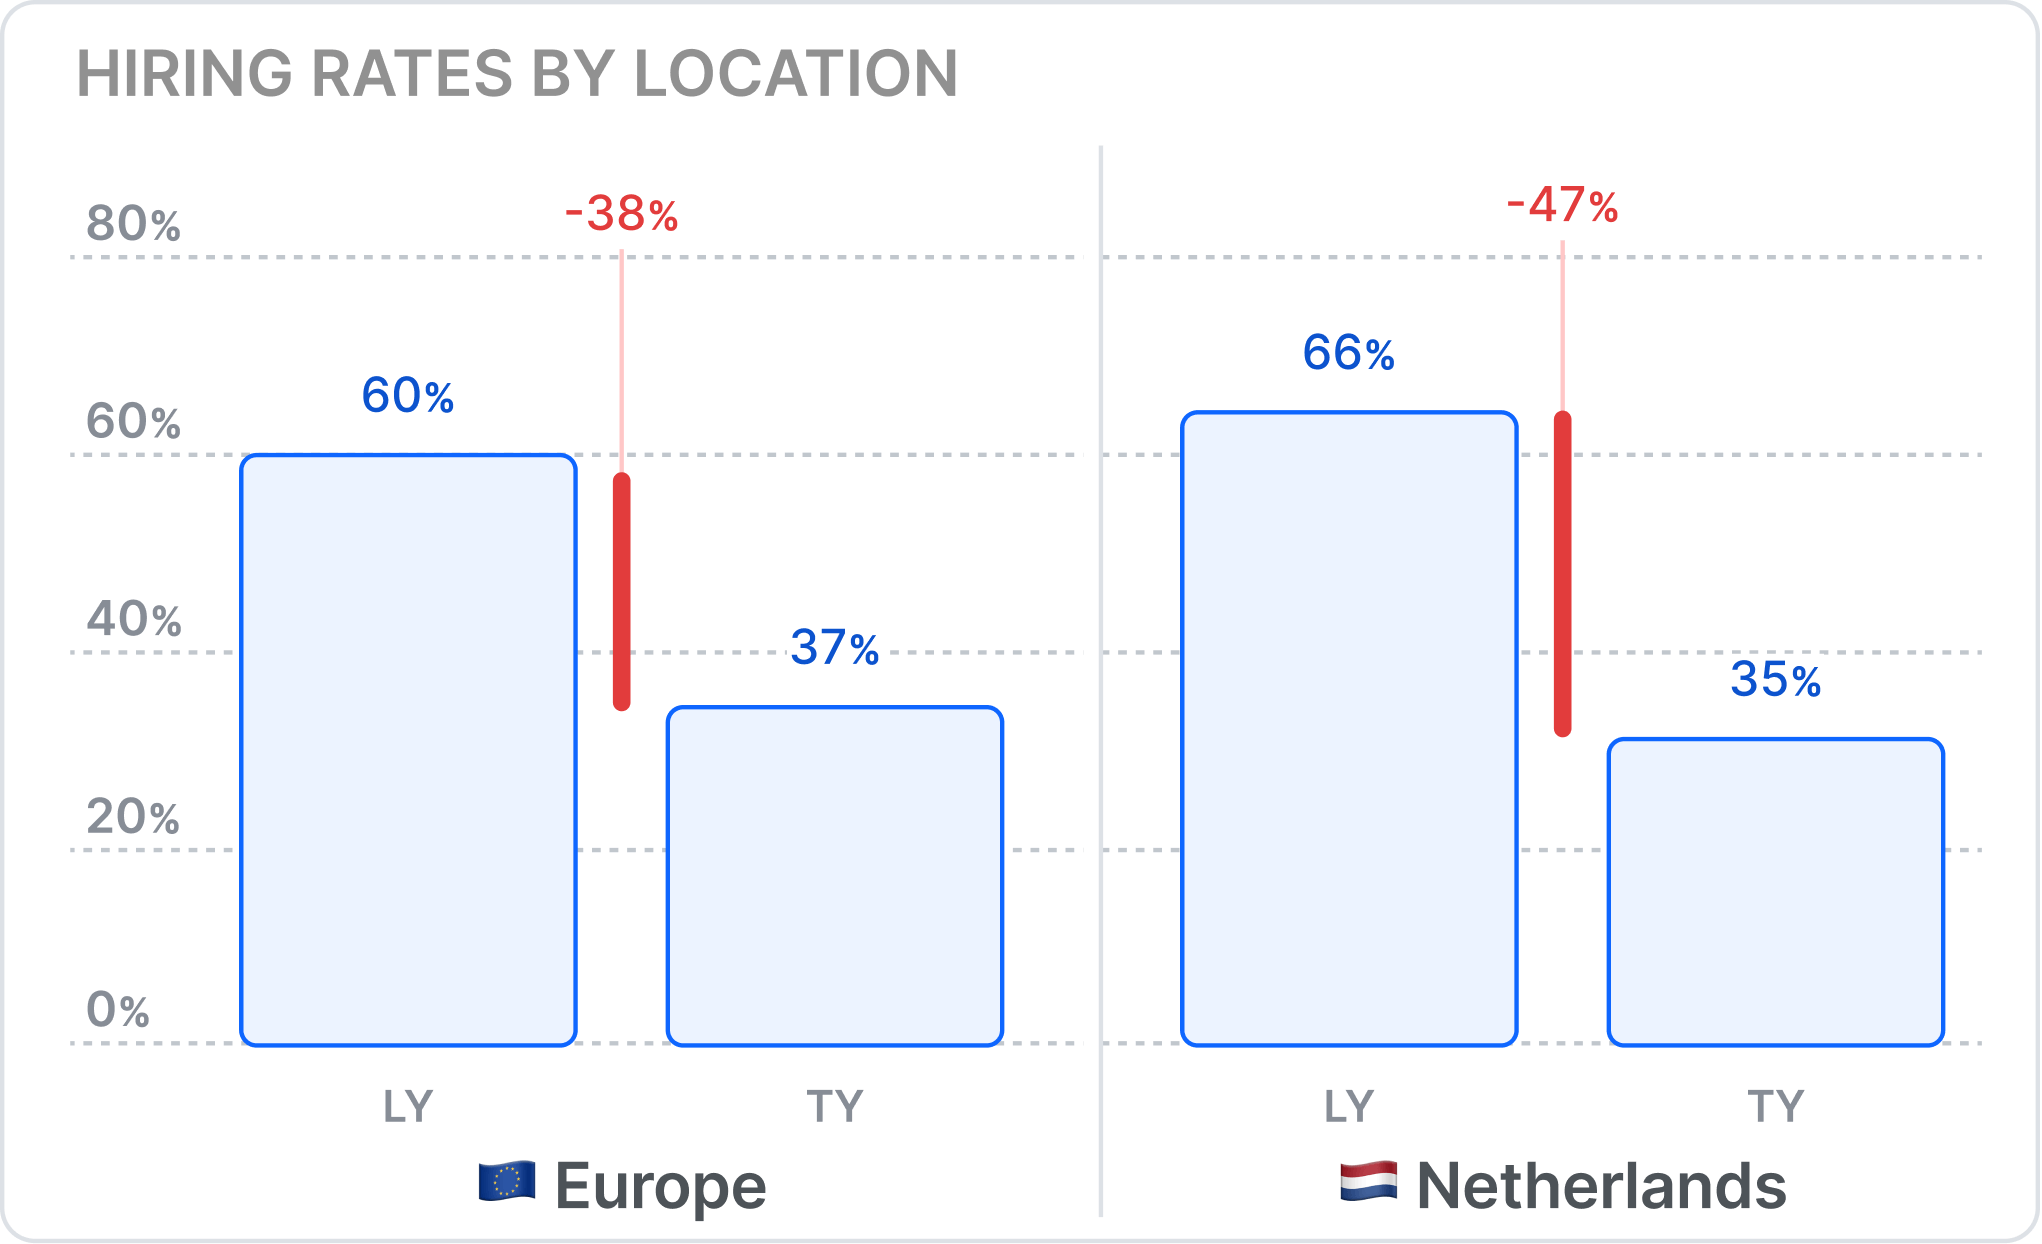 Hiring rates by location. Europe: last year 60%, this year 37%. Netherlands last year 66%, this year 35%.